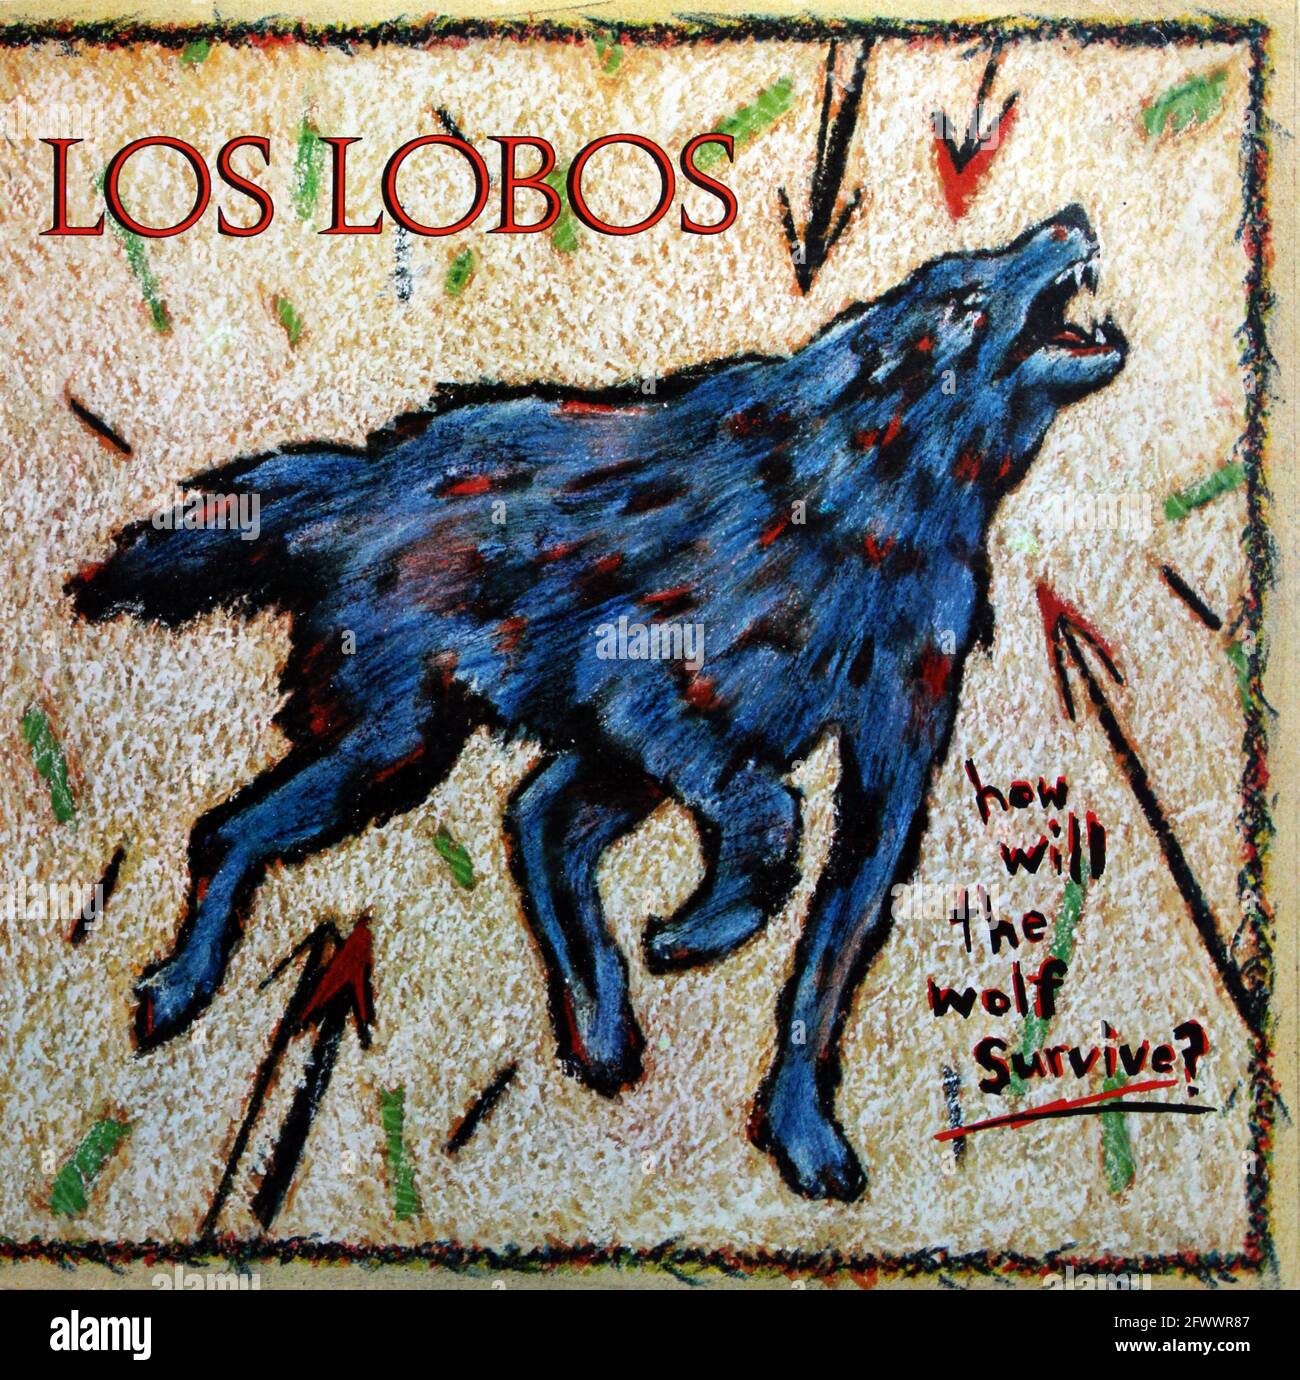 Los Lobos: 1984. LP front cover: How Will The Wolf Survive? Stock Photo